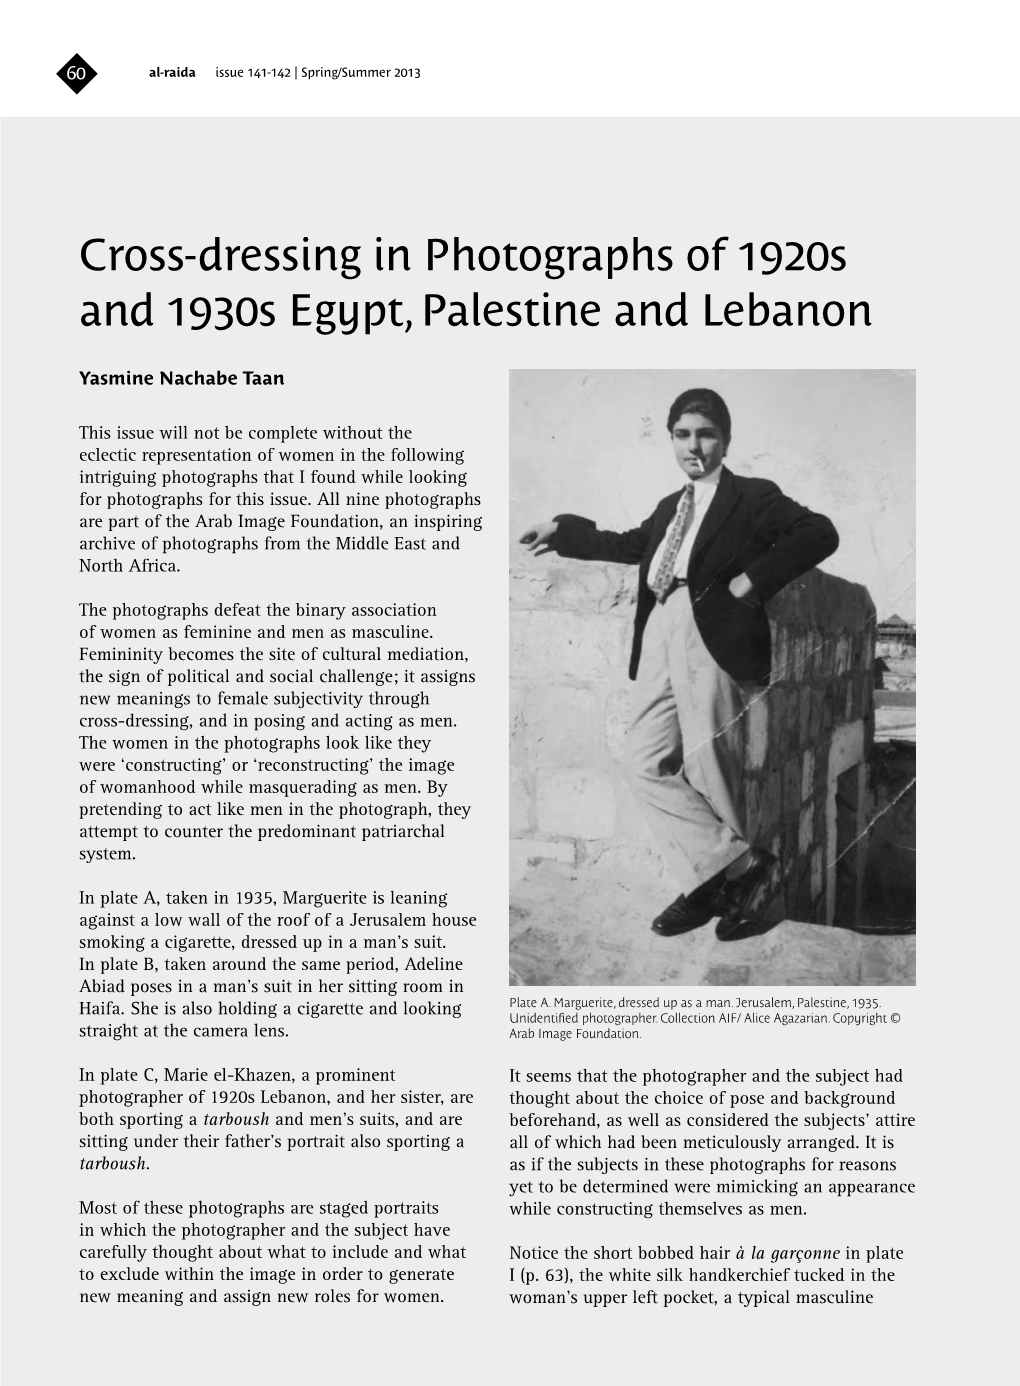 Cross-Dressing in Photographs of 1920S and 1930S Egypt, Palestine and Lebanon